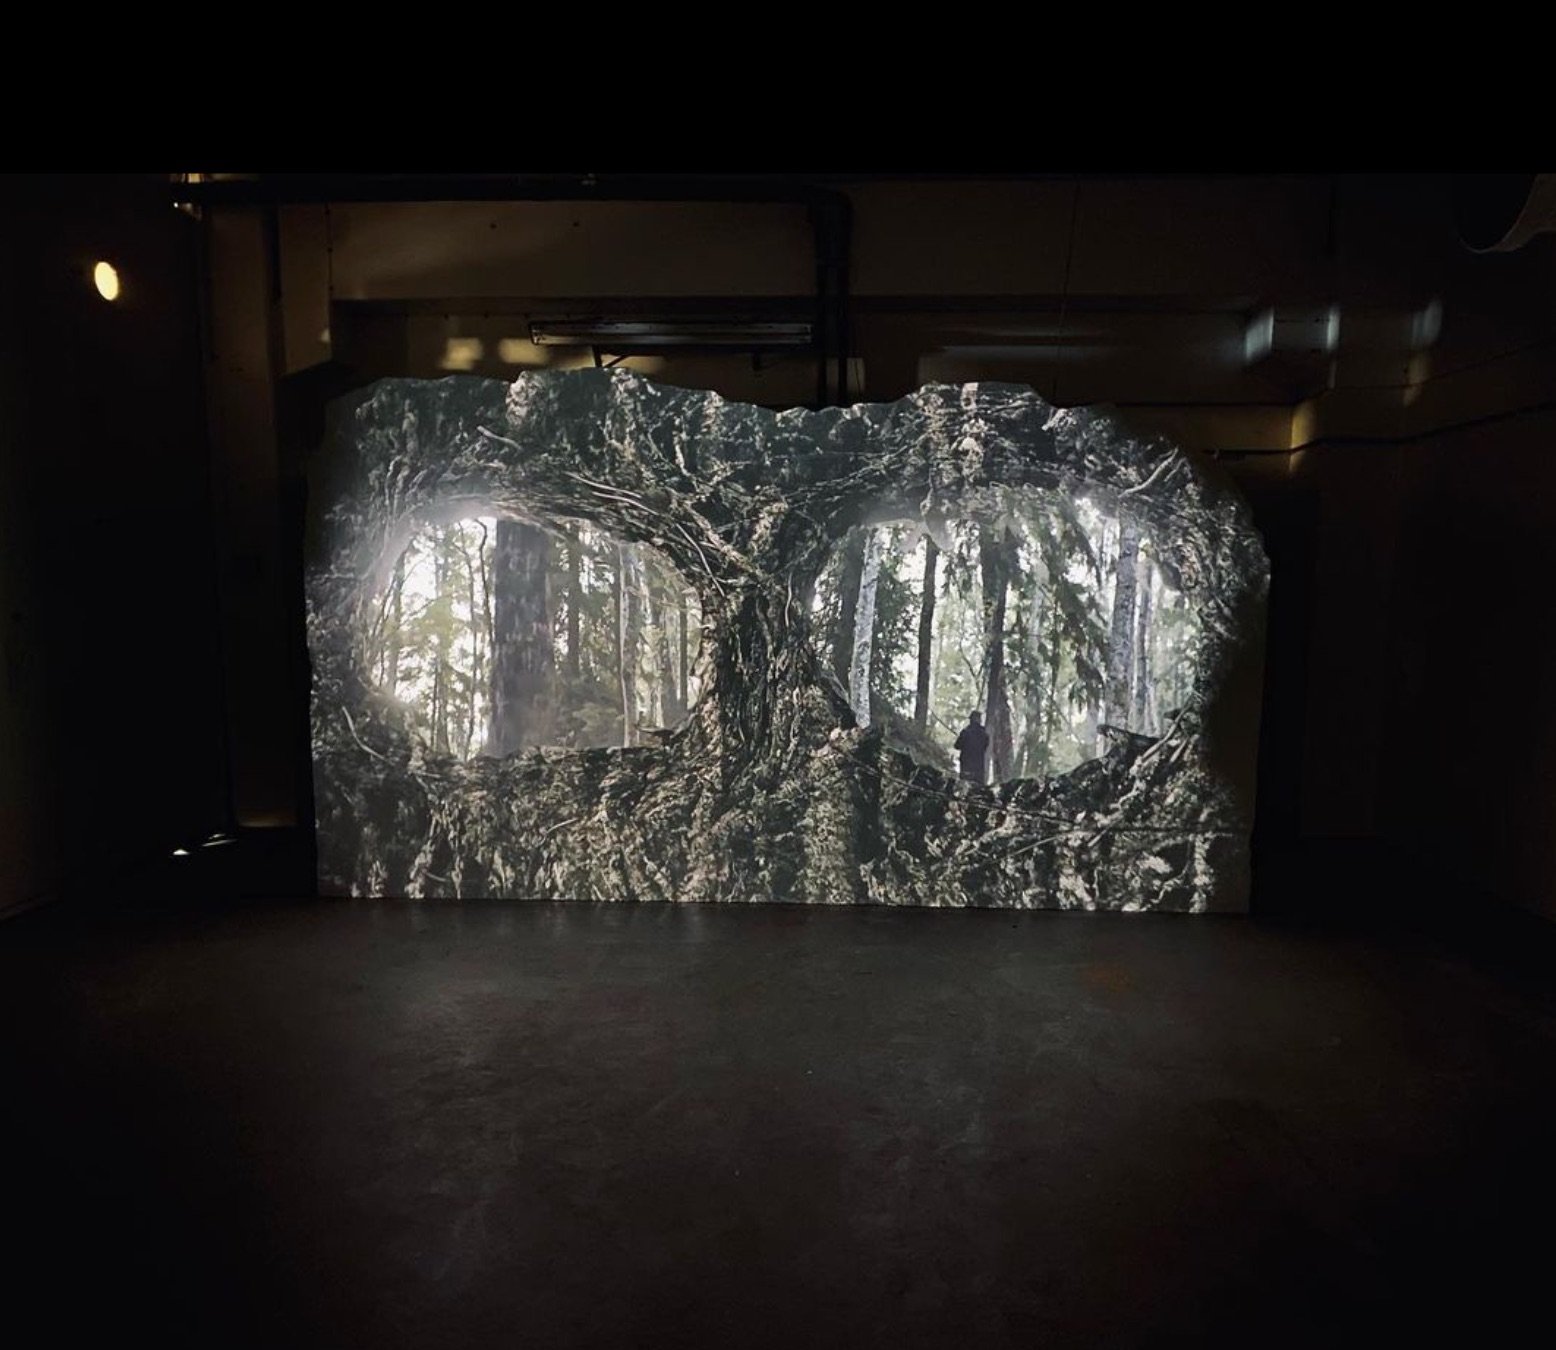  Installation view of  Second nature , video projection.  